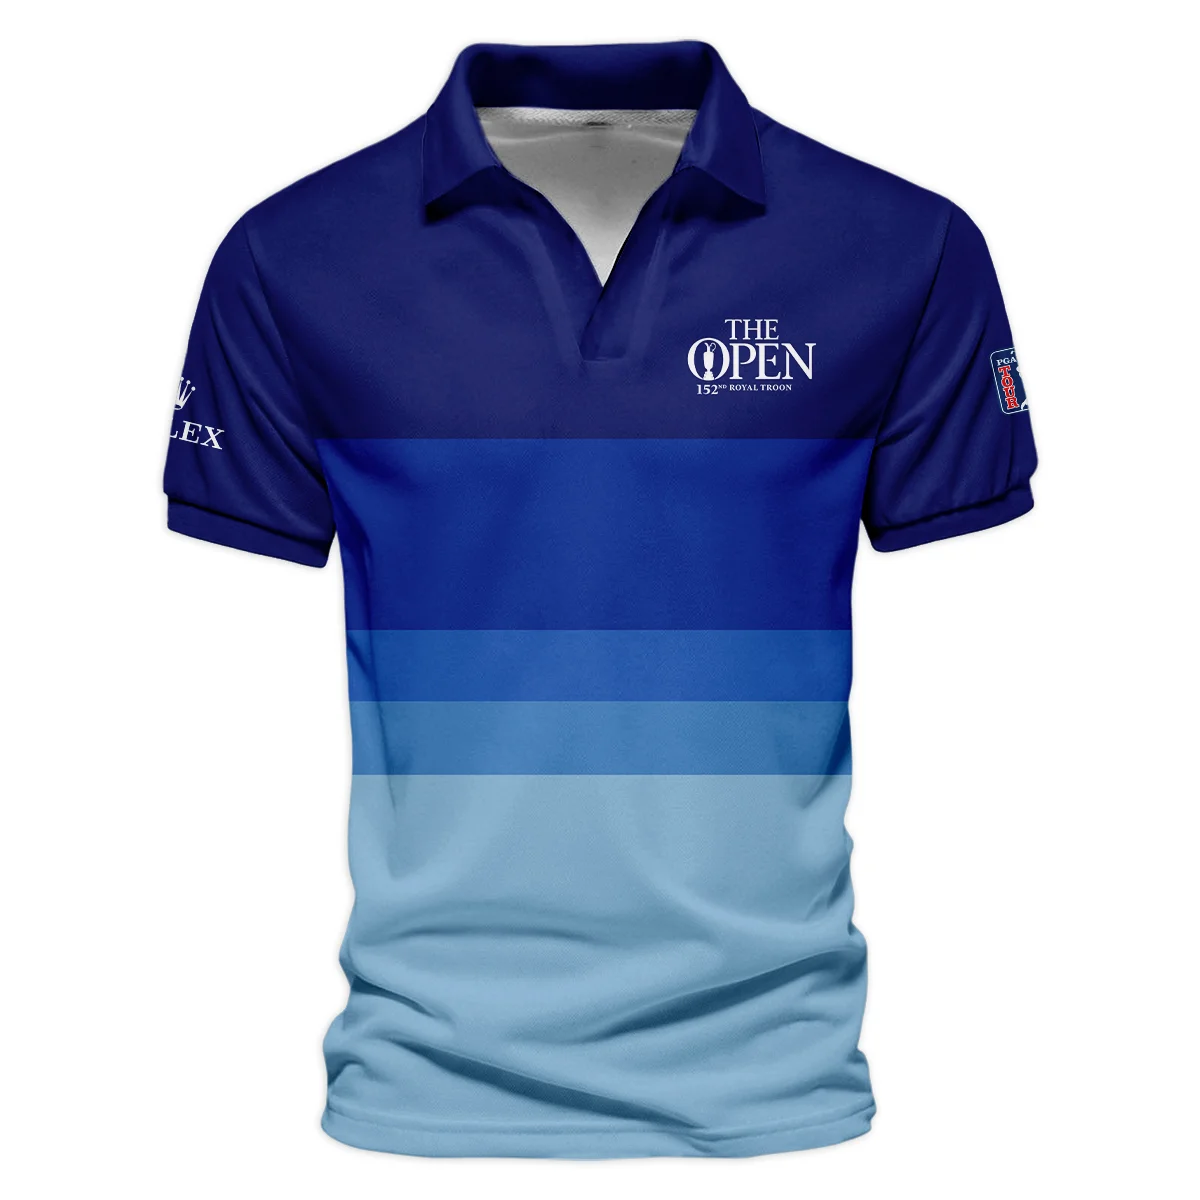 Blue Gradient Line Pattern Background Rolex 152nd Open Championship Quarter-Zip Jacket All Over Prints HOTOP270624A04ROXSWZ